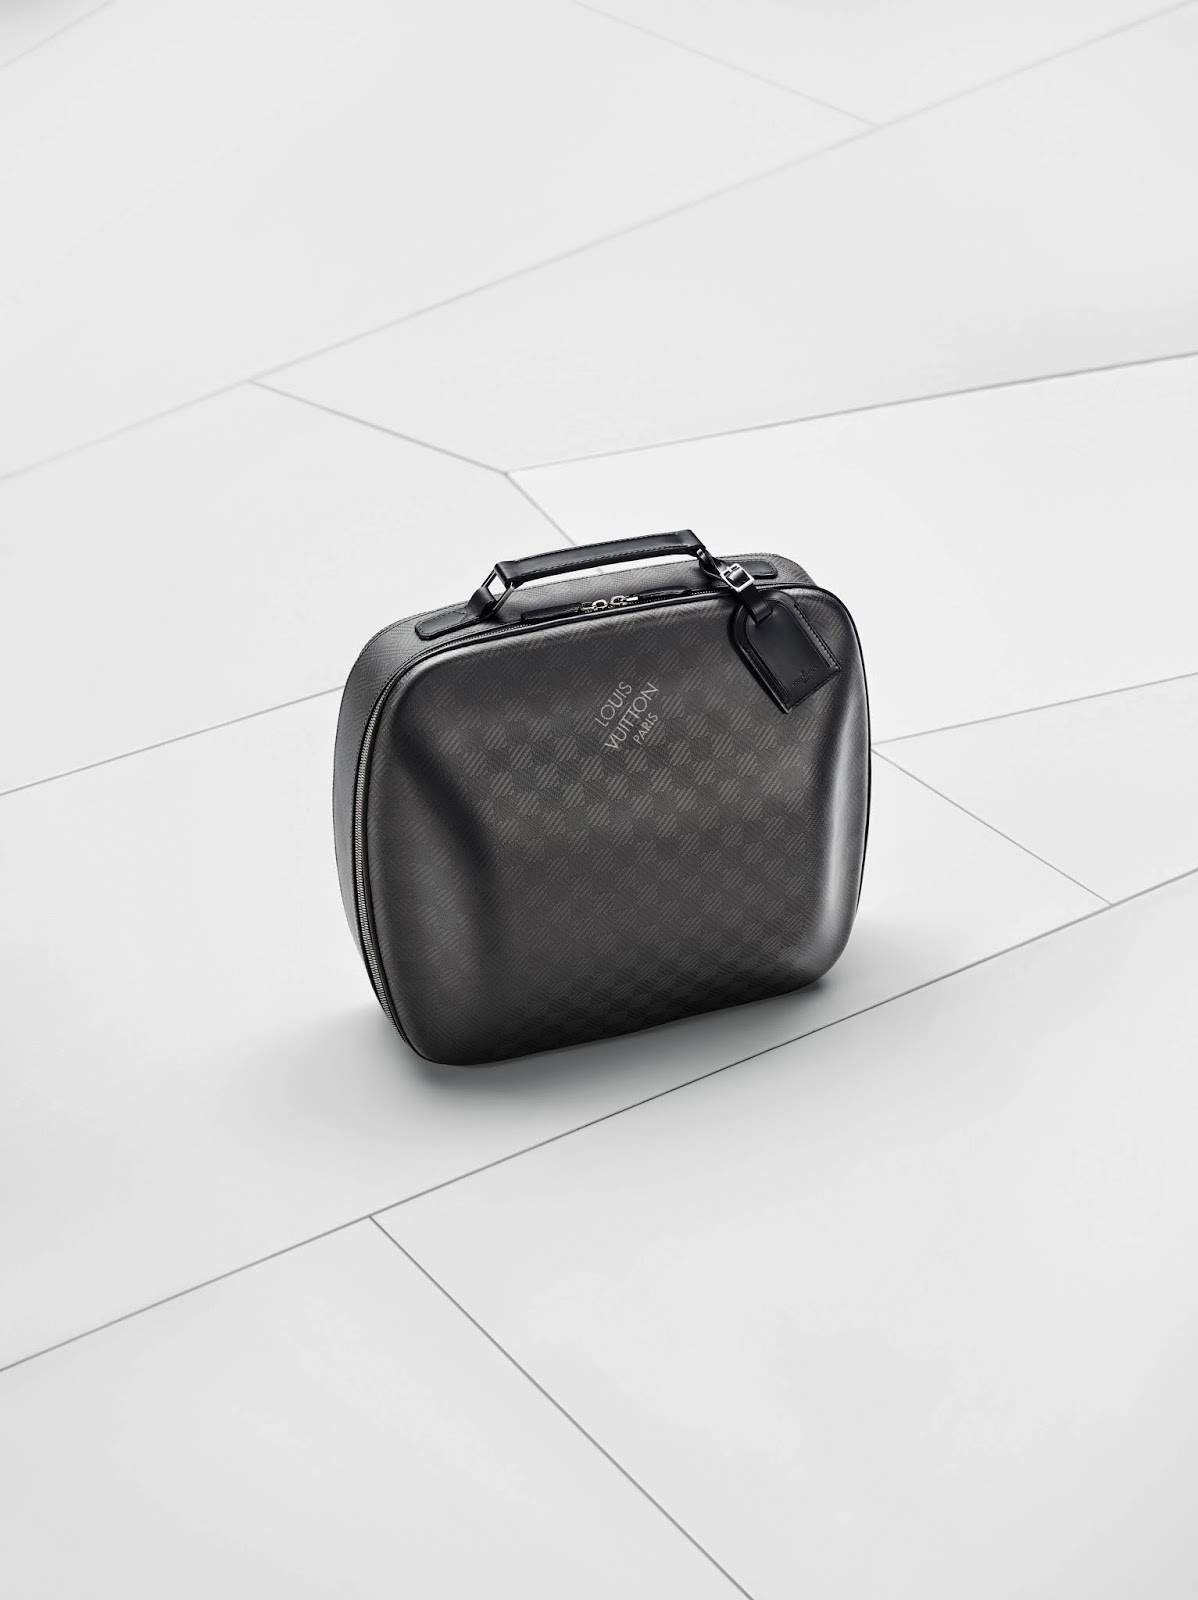 The tailor-made Louis Vuitton luggage set for the BMW i8 made from